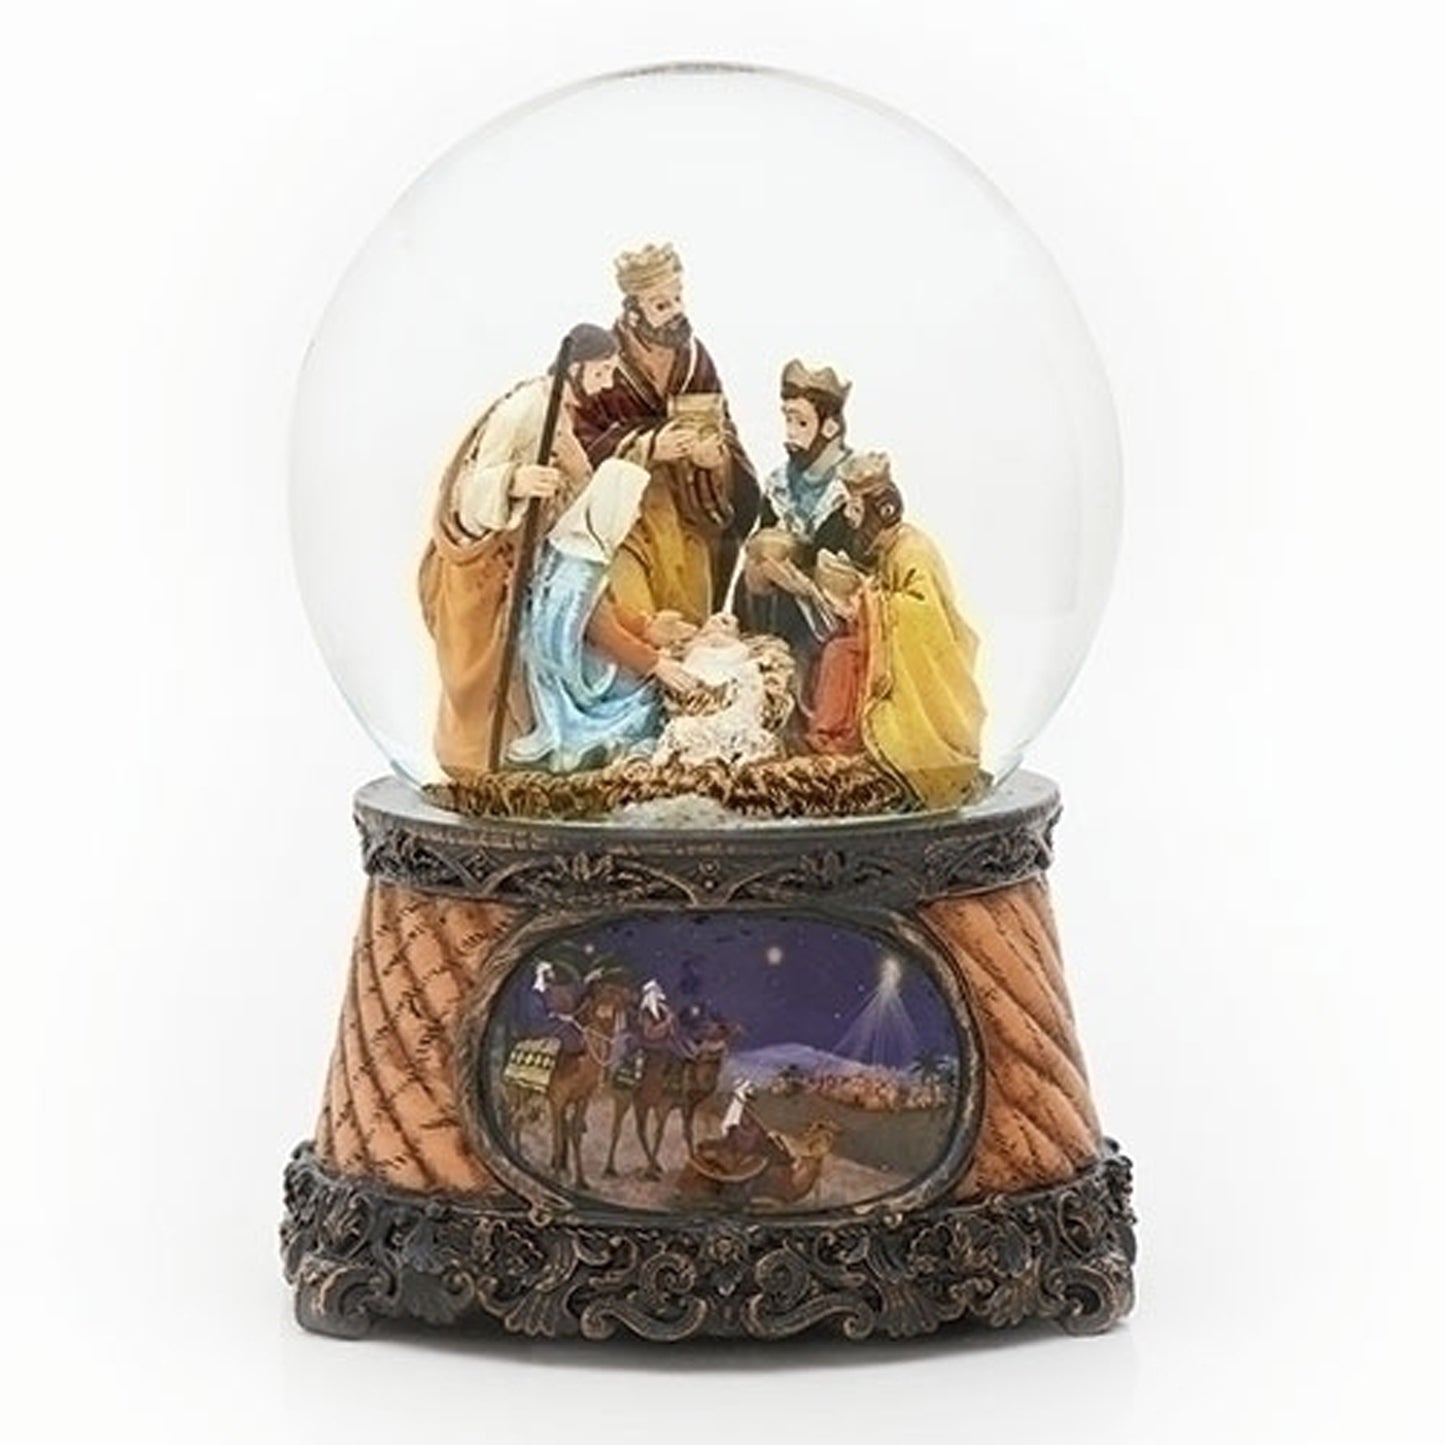 Three Kings Nativity Scene 6 Inch Musical Holiday Glitter Dome Plays Tune Little Drummer Boy